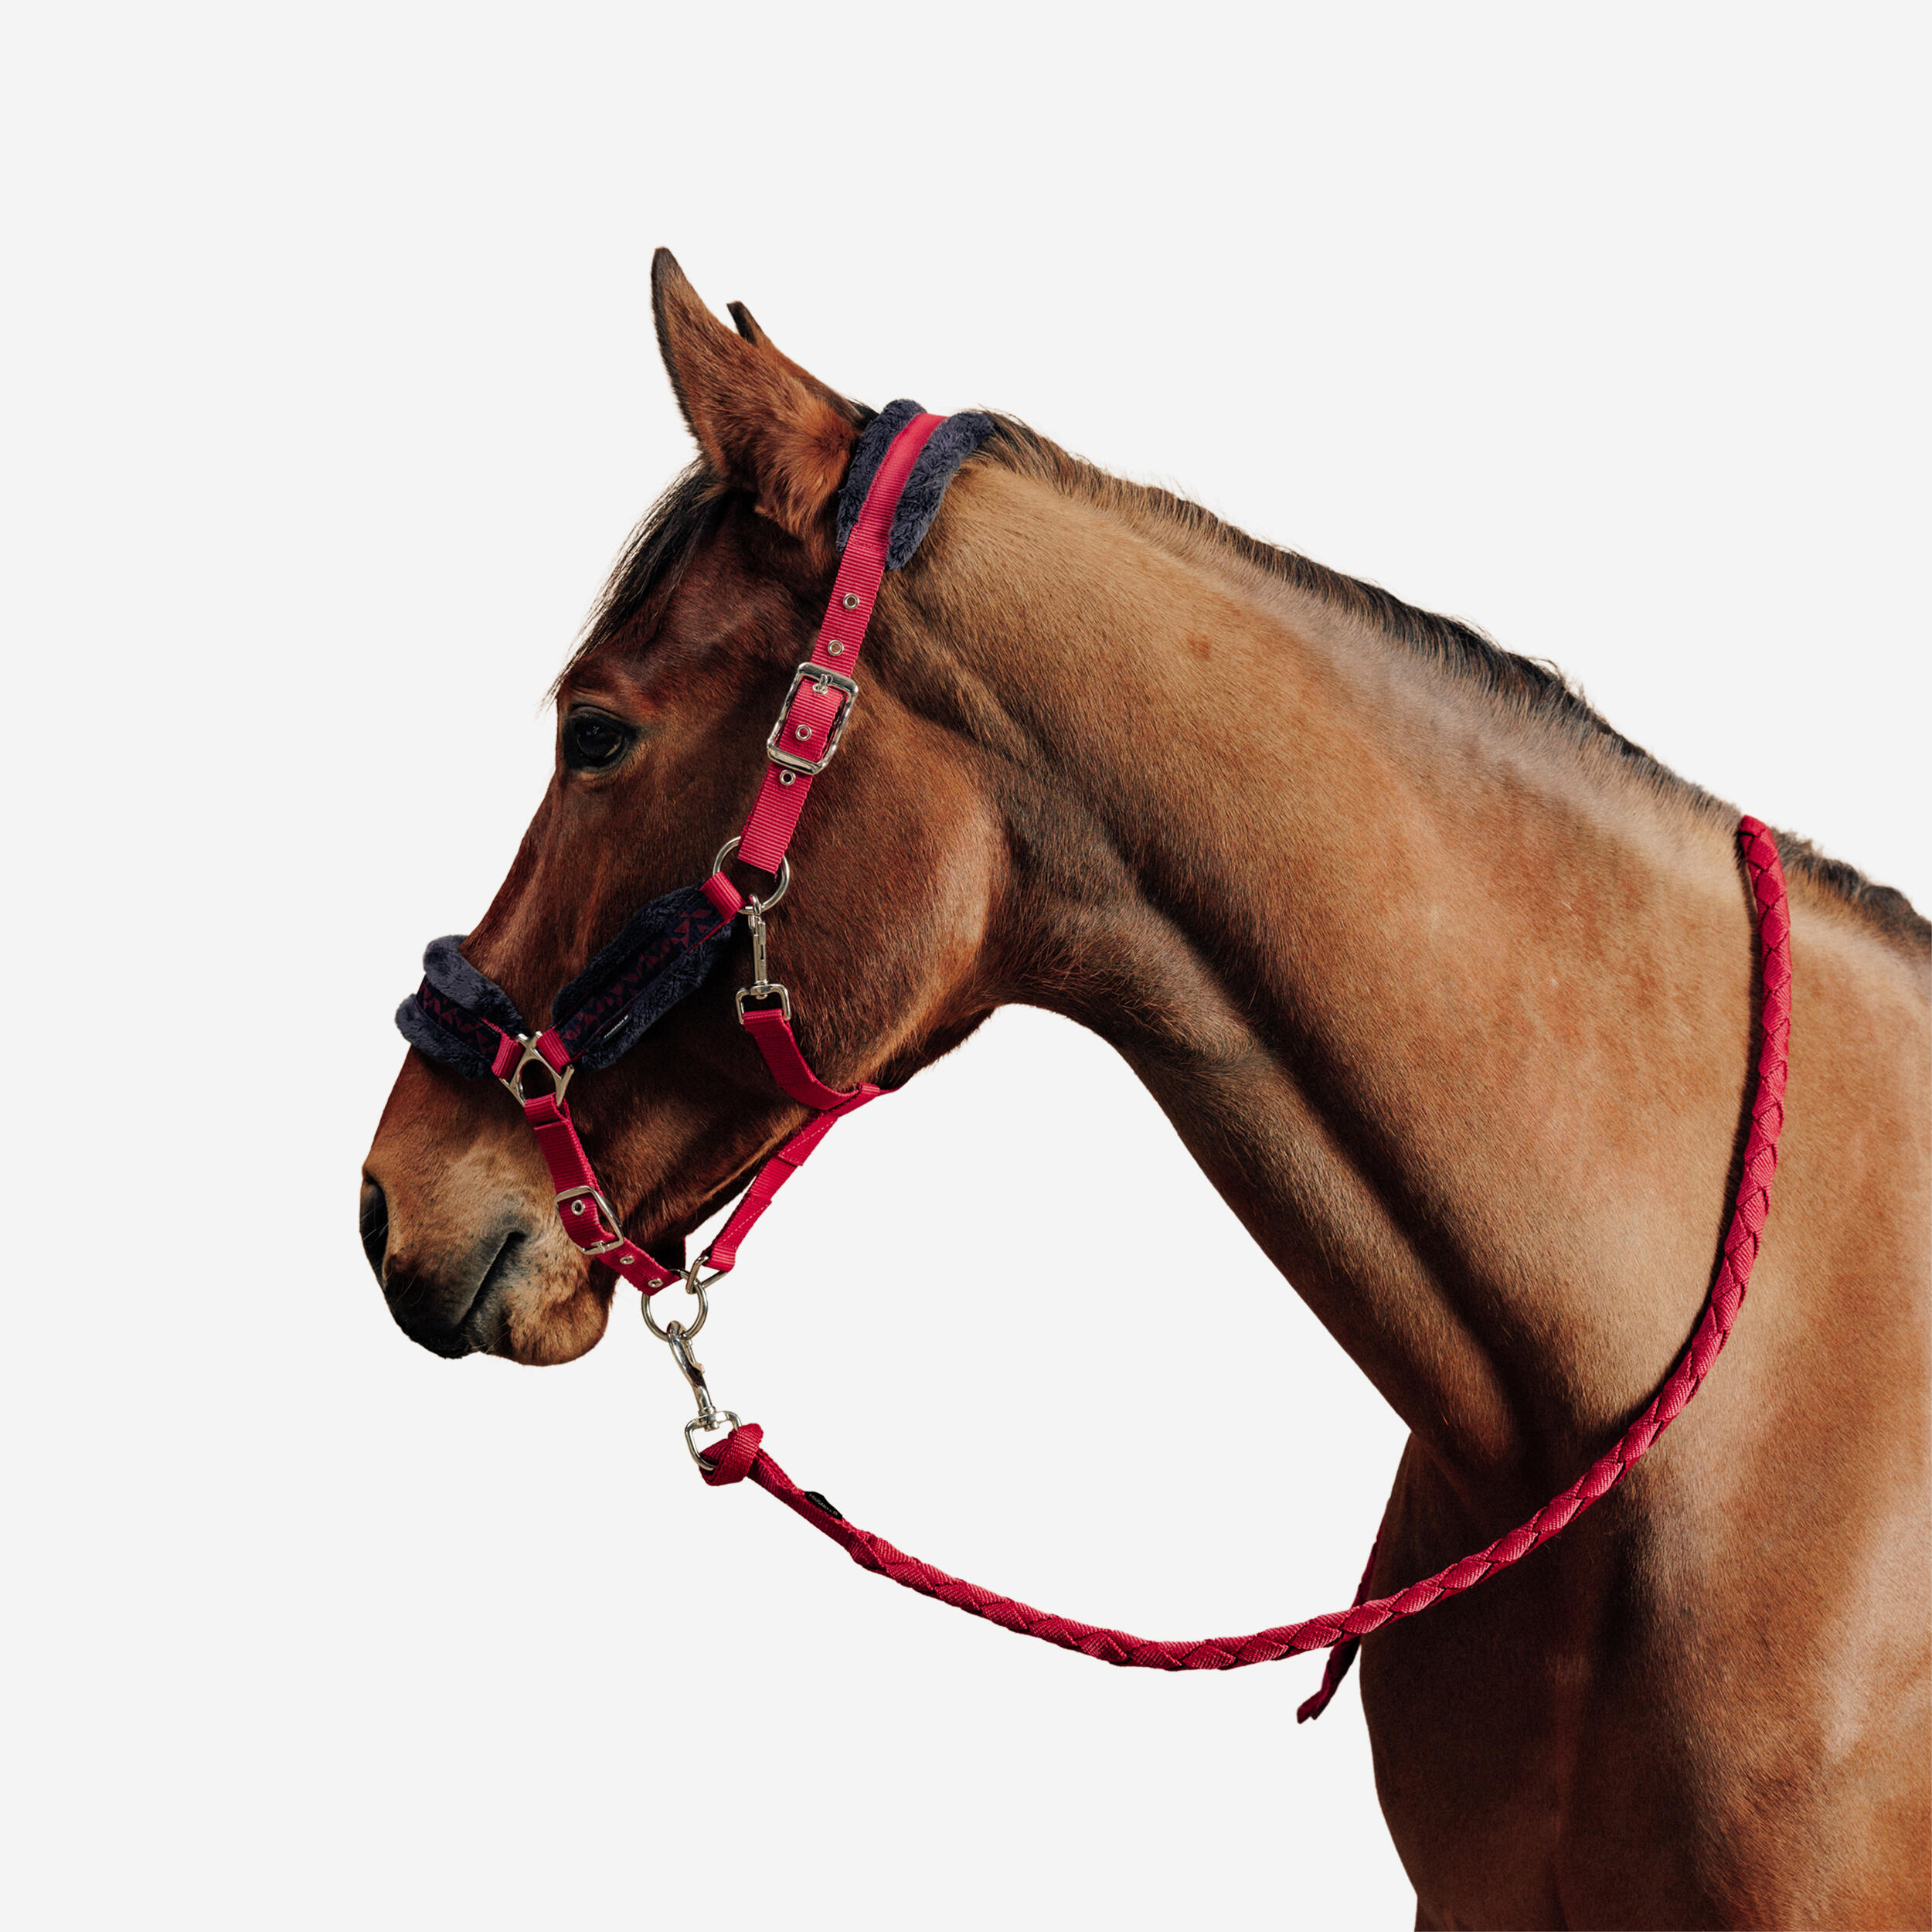 FOUGANZA Horse Riding Halter + Leadrope Kit for Horse & Pony Comfort - Pink/Blue/Black